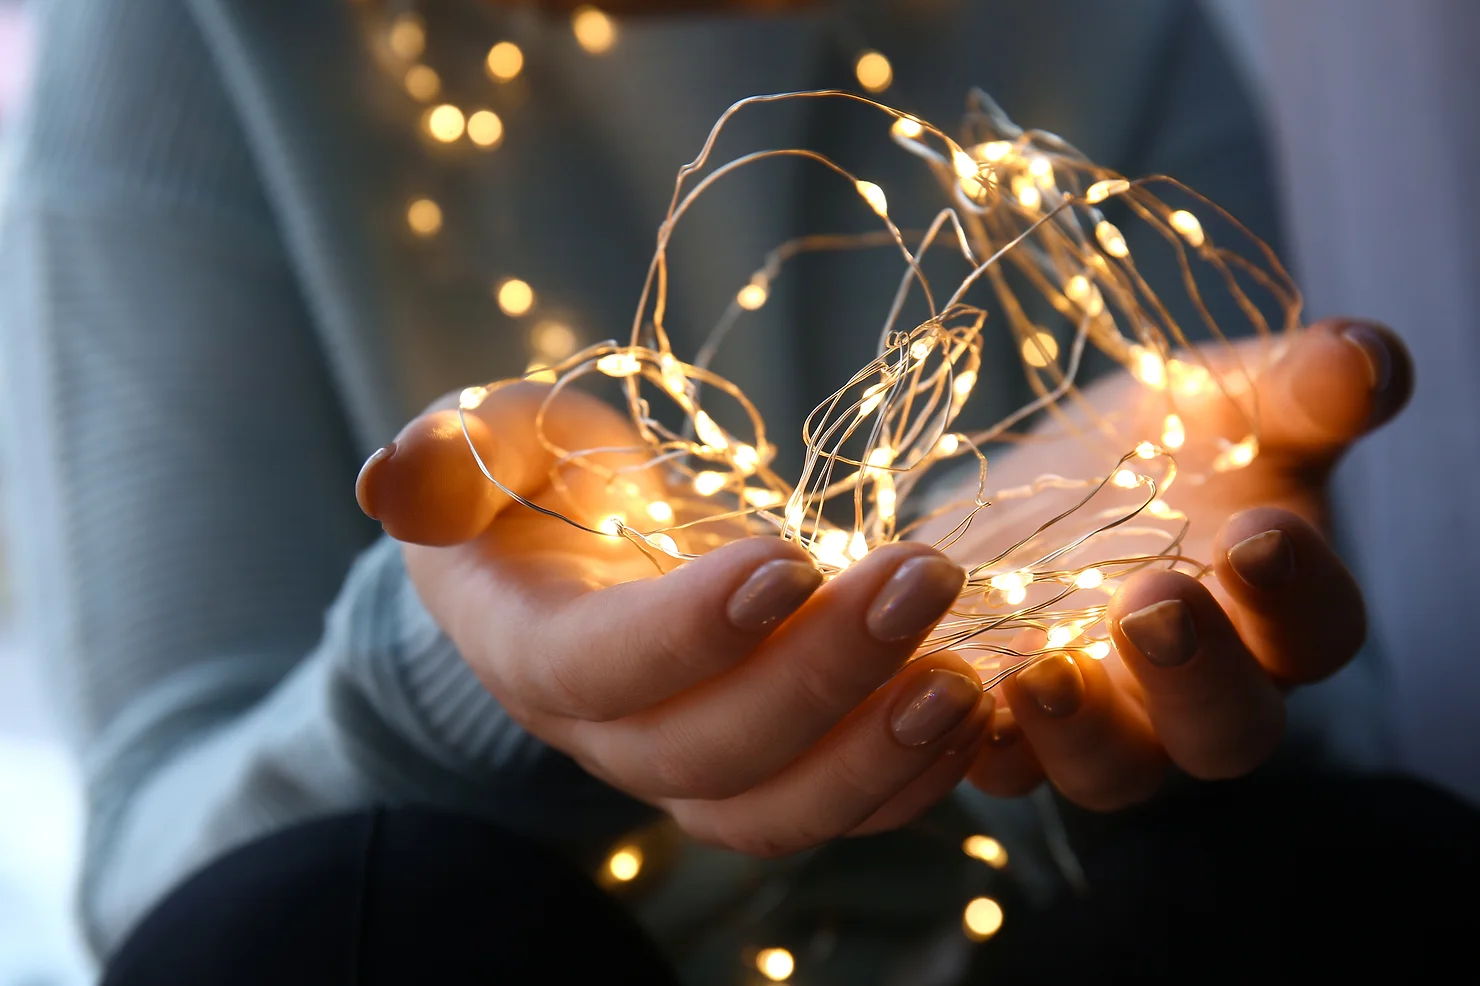 A person is holding a warm, glowing string of LED fairy lights gently in their hands, creating a cozy and magical atmosphere.